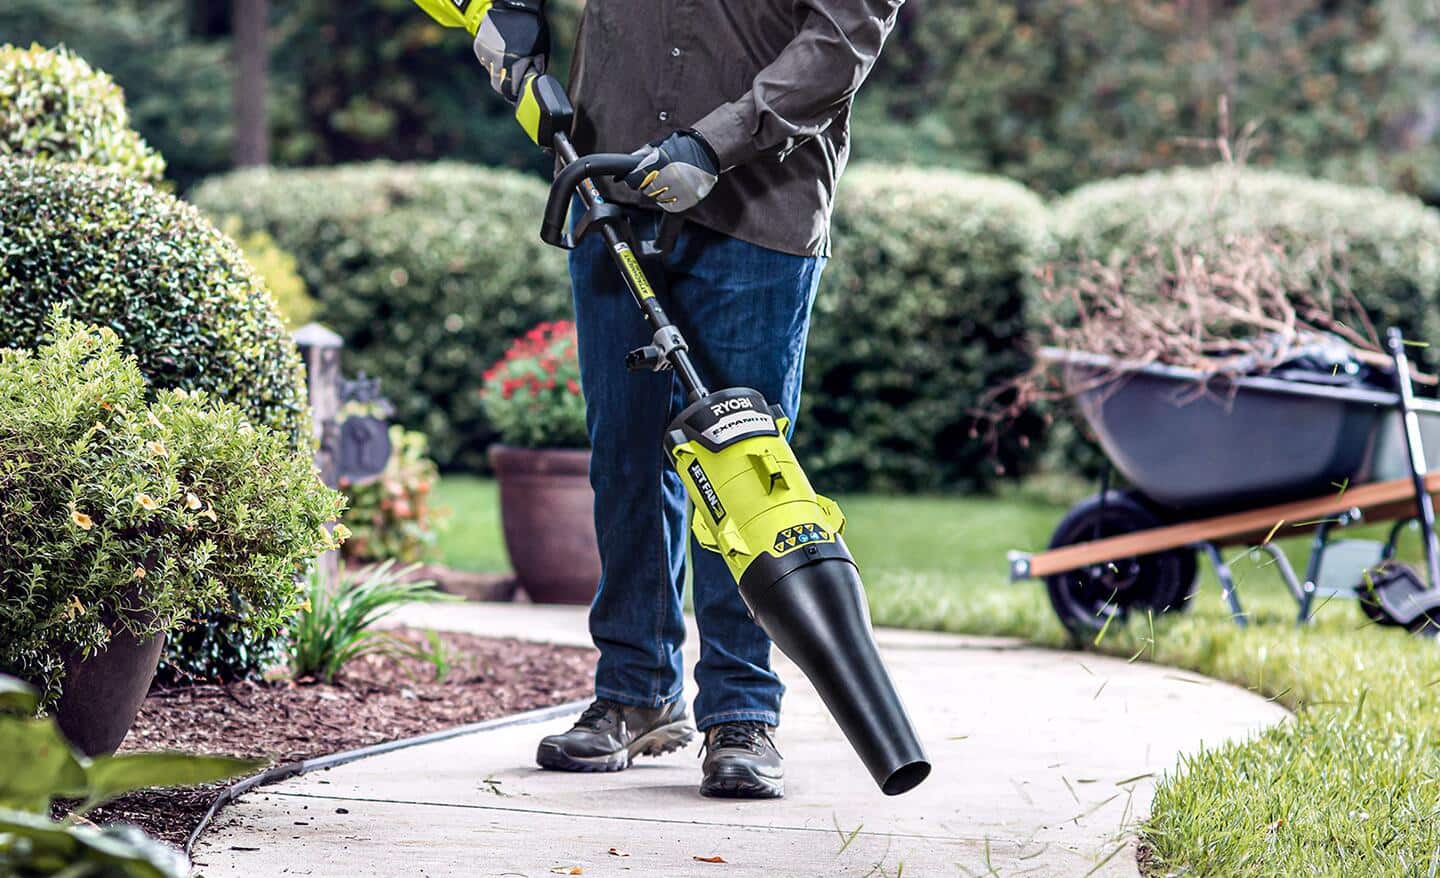 A person uses a string trimmer with a leaf blower attachment to remove leaves and debris from a paved path.